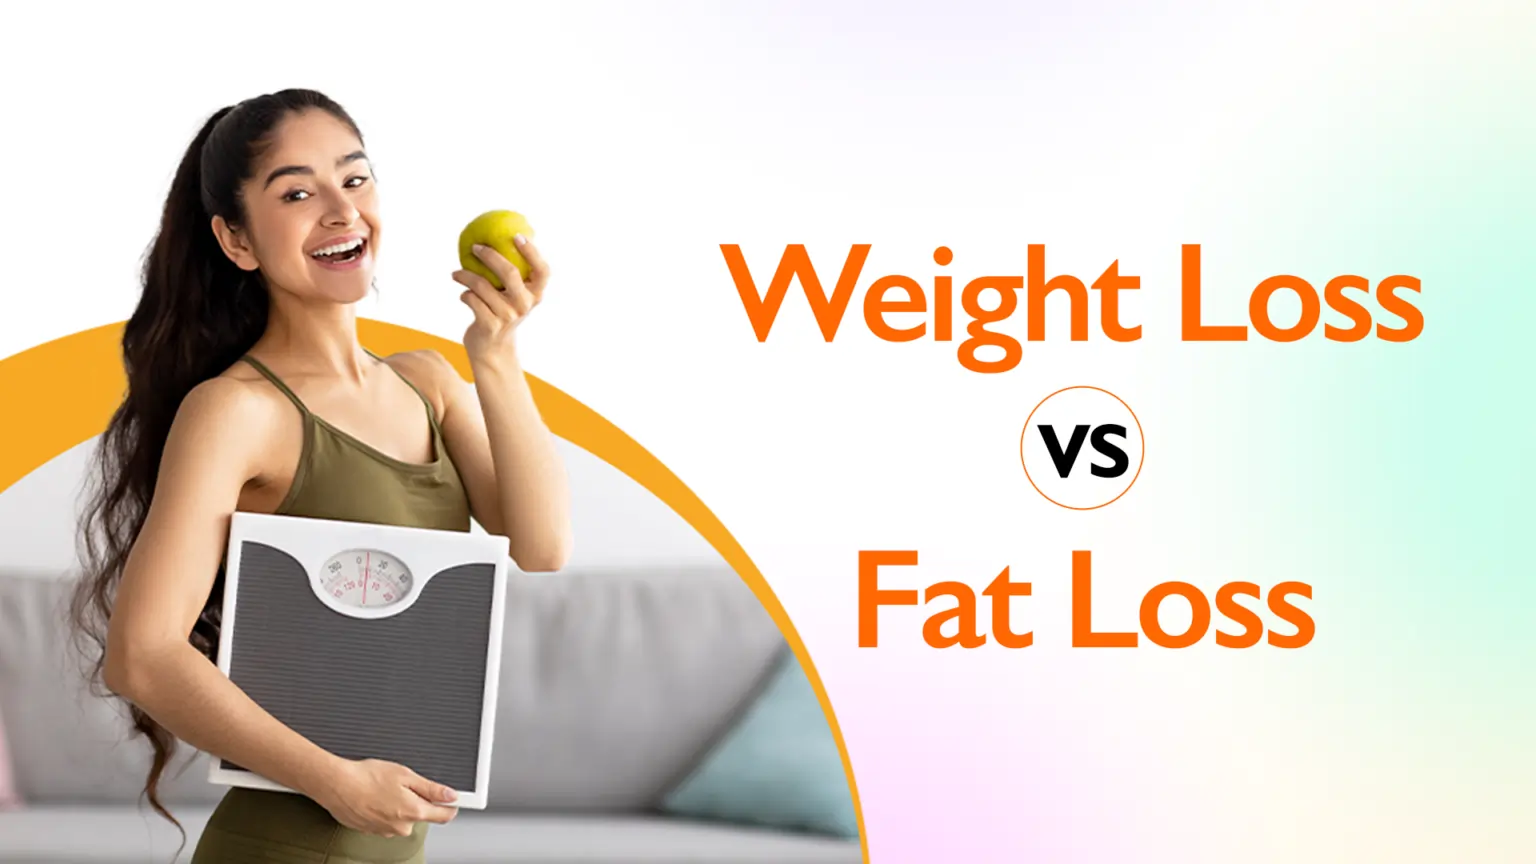 Weight Loss vs. Fat Loss: What's the Difference